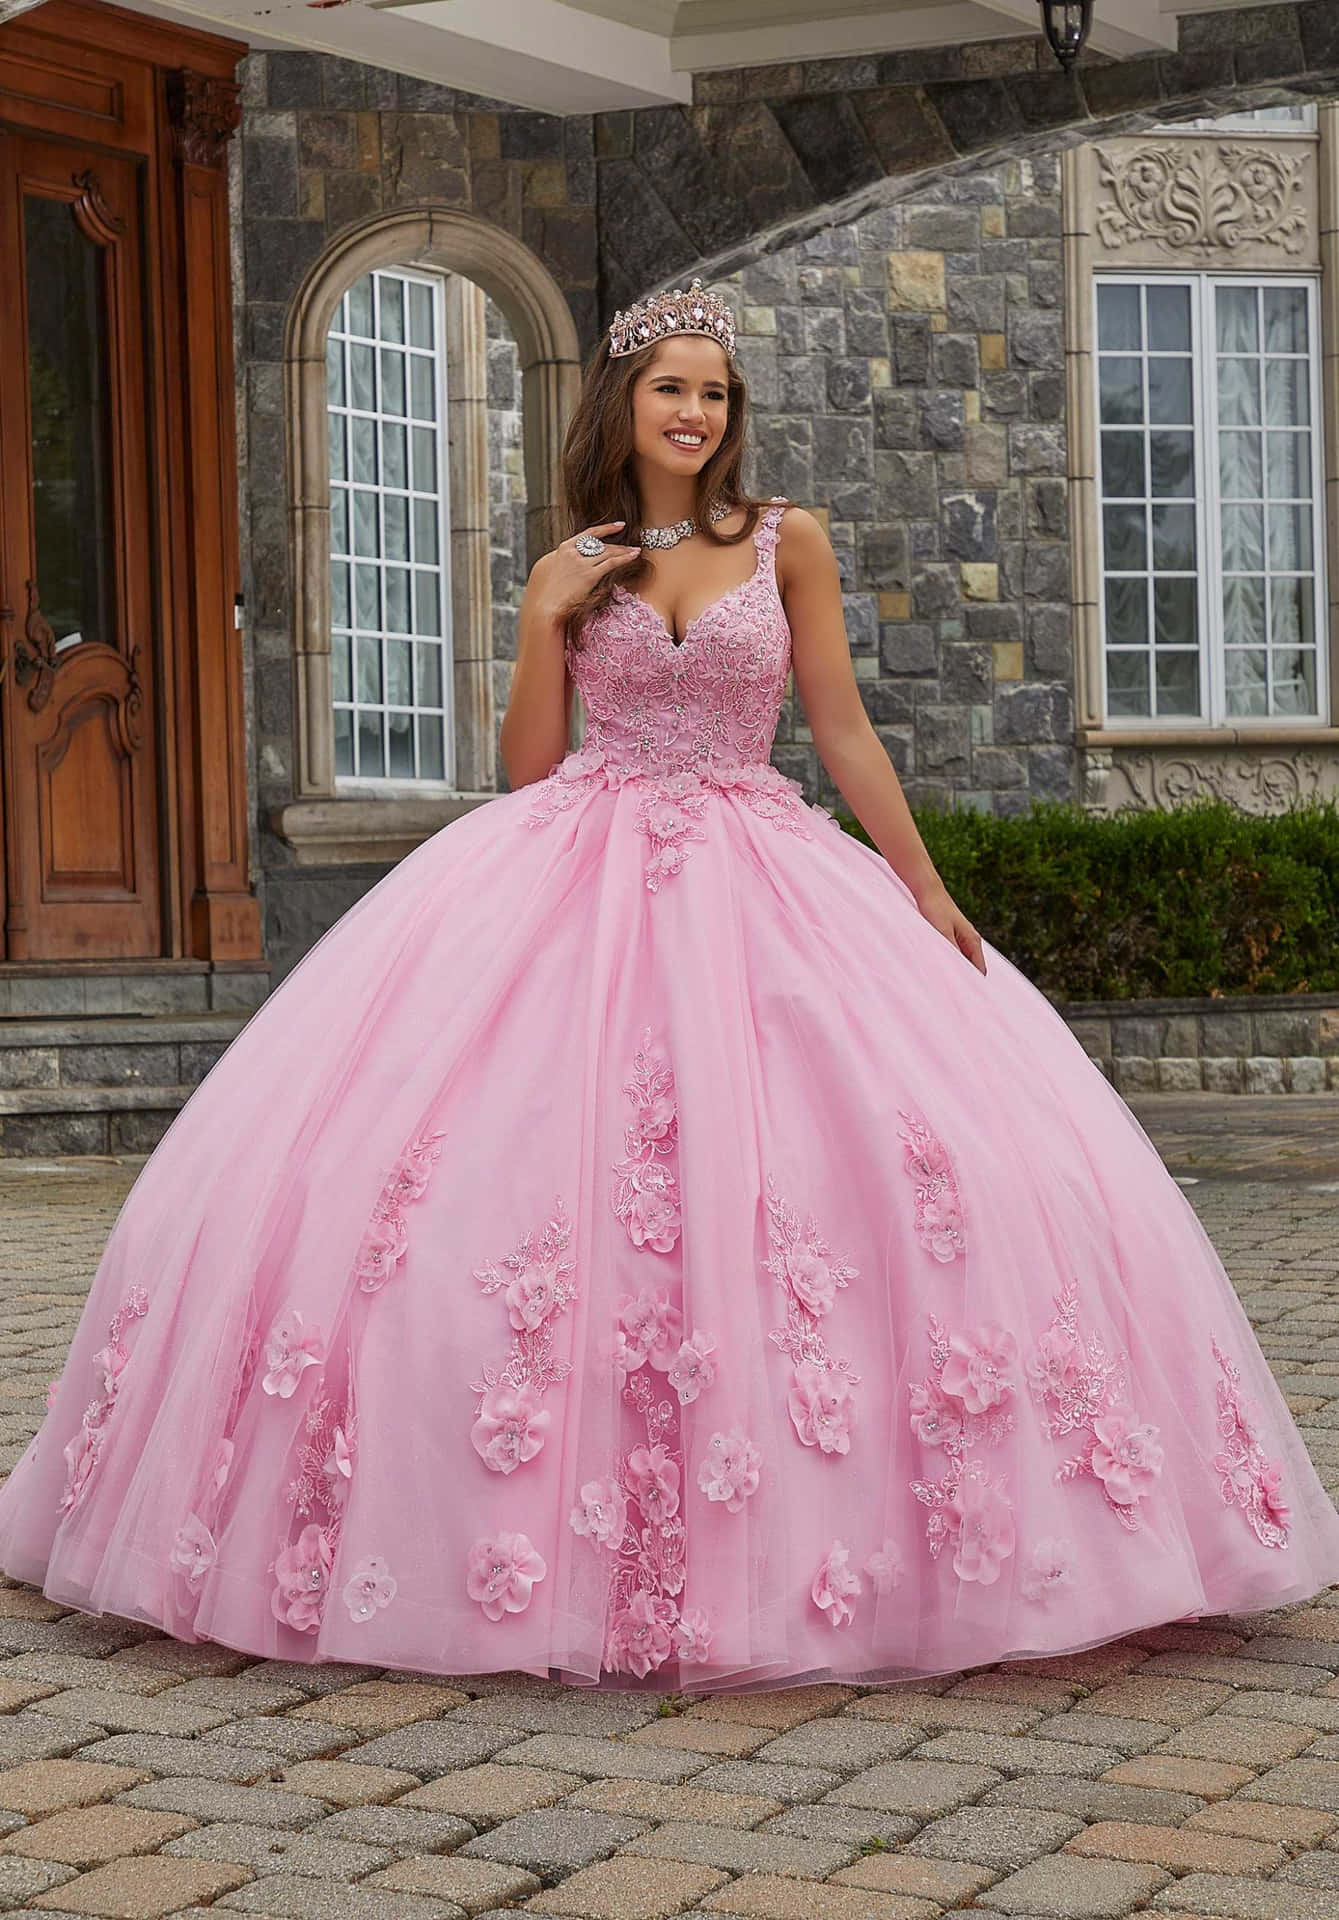 A Young Girl In A Pink Quinceanera Dress